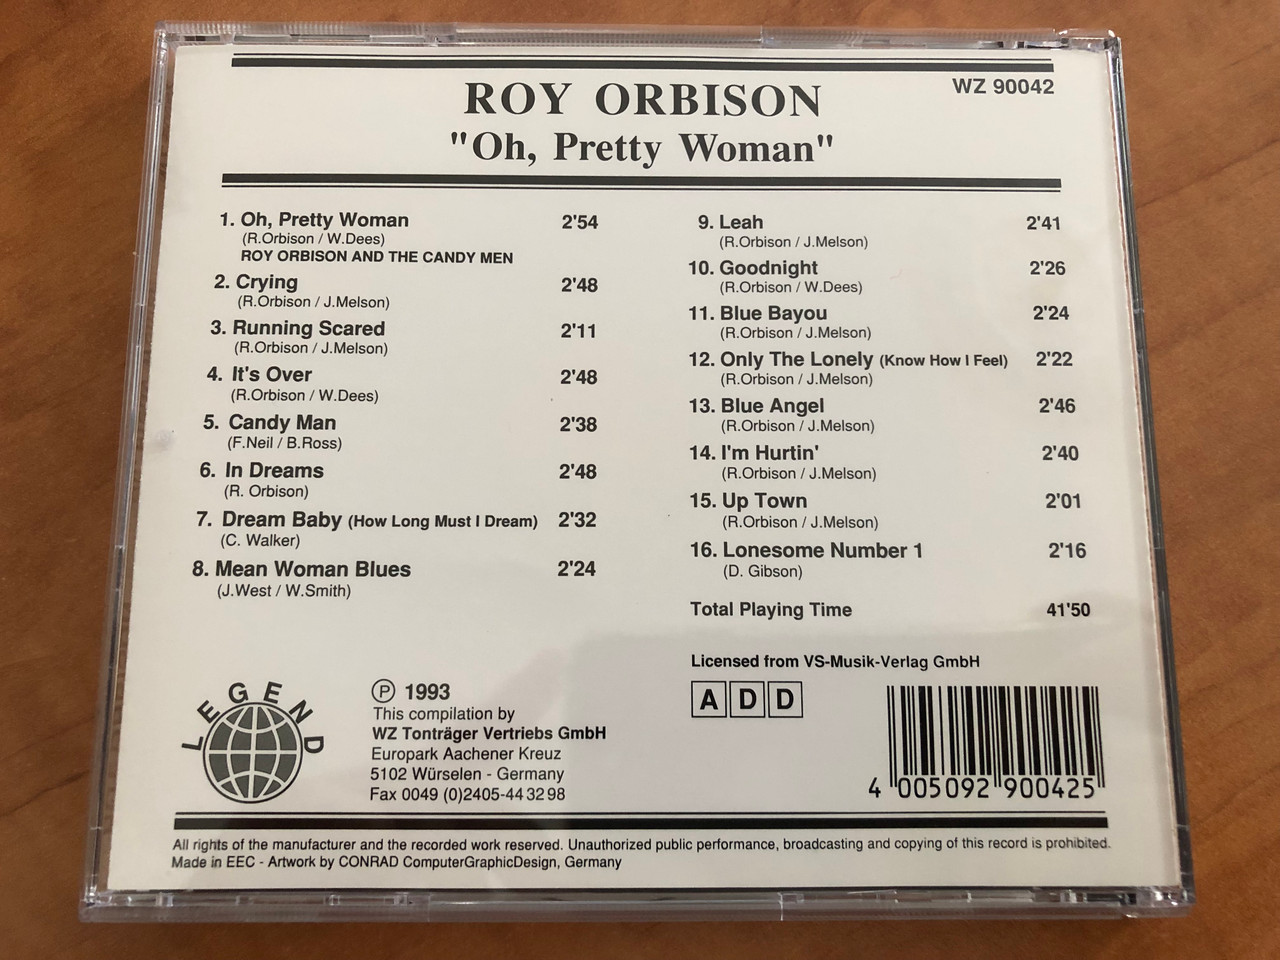 https://cdn10.bigcommerce.com/s-62bdpkt7pb/products/30796/images/181816/Roy_Orbison_-_Oh_Pretty_Woman_Crying_Its_Over_In_Dreams_Blue_Angel_and_many_more_Legend_Audio_CD_1993_WZ_90042_4__57126.1623931887.1280.1280.JPG?c=2